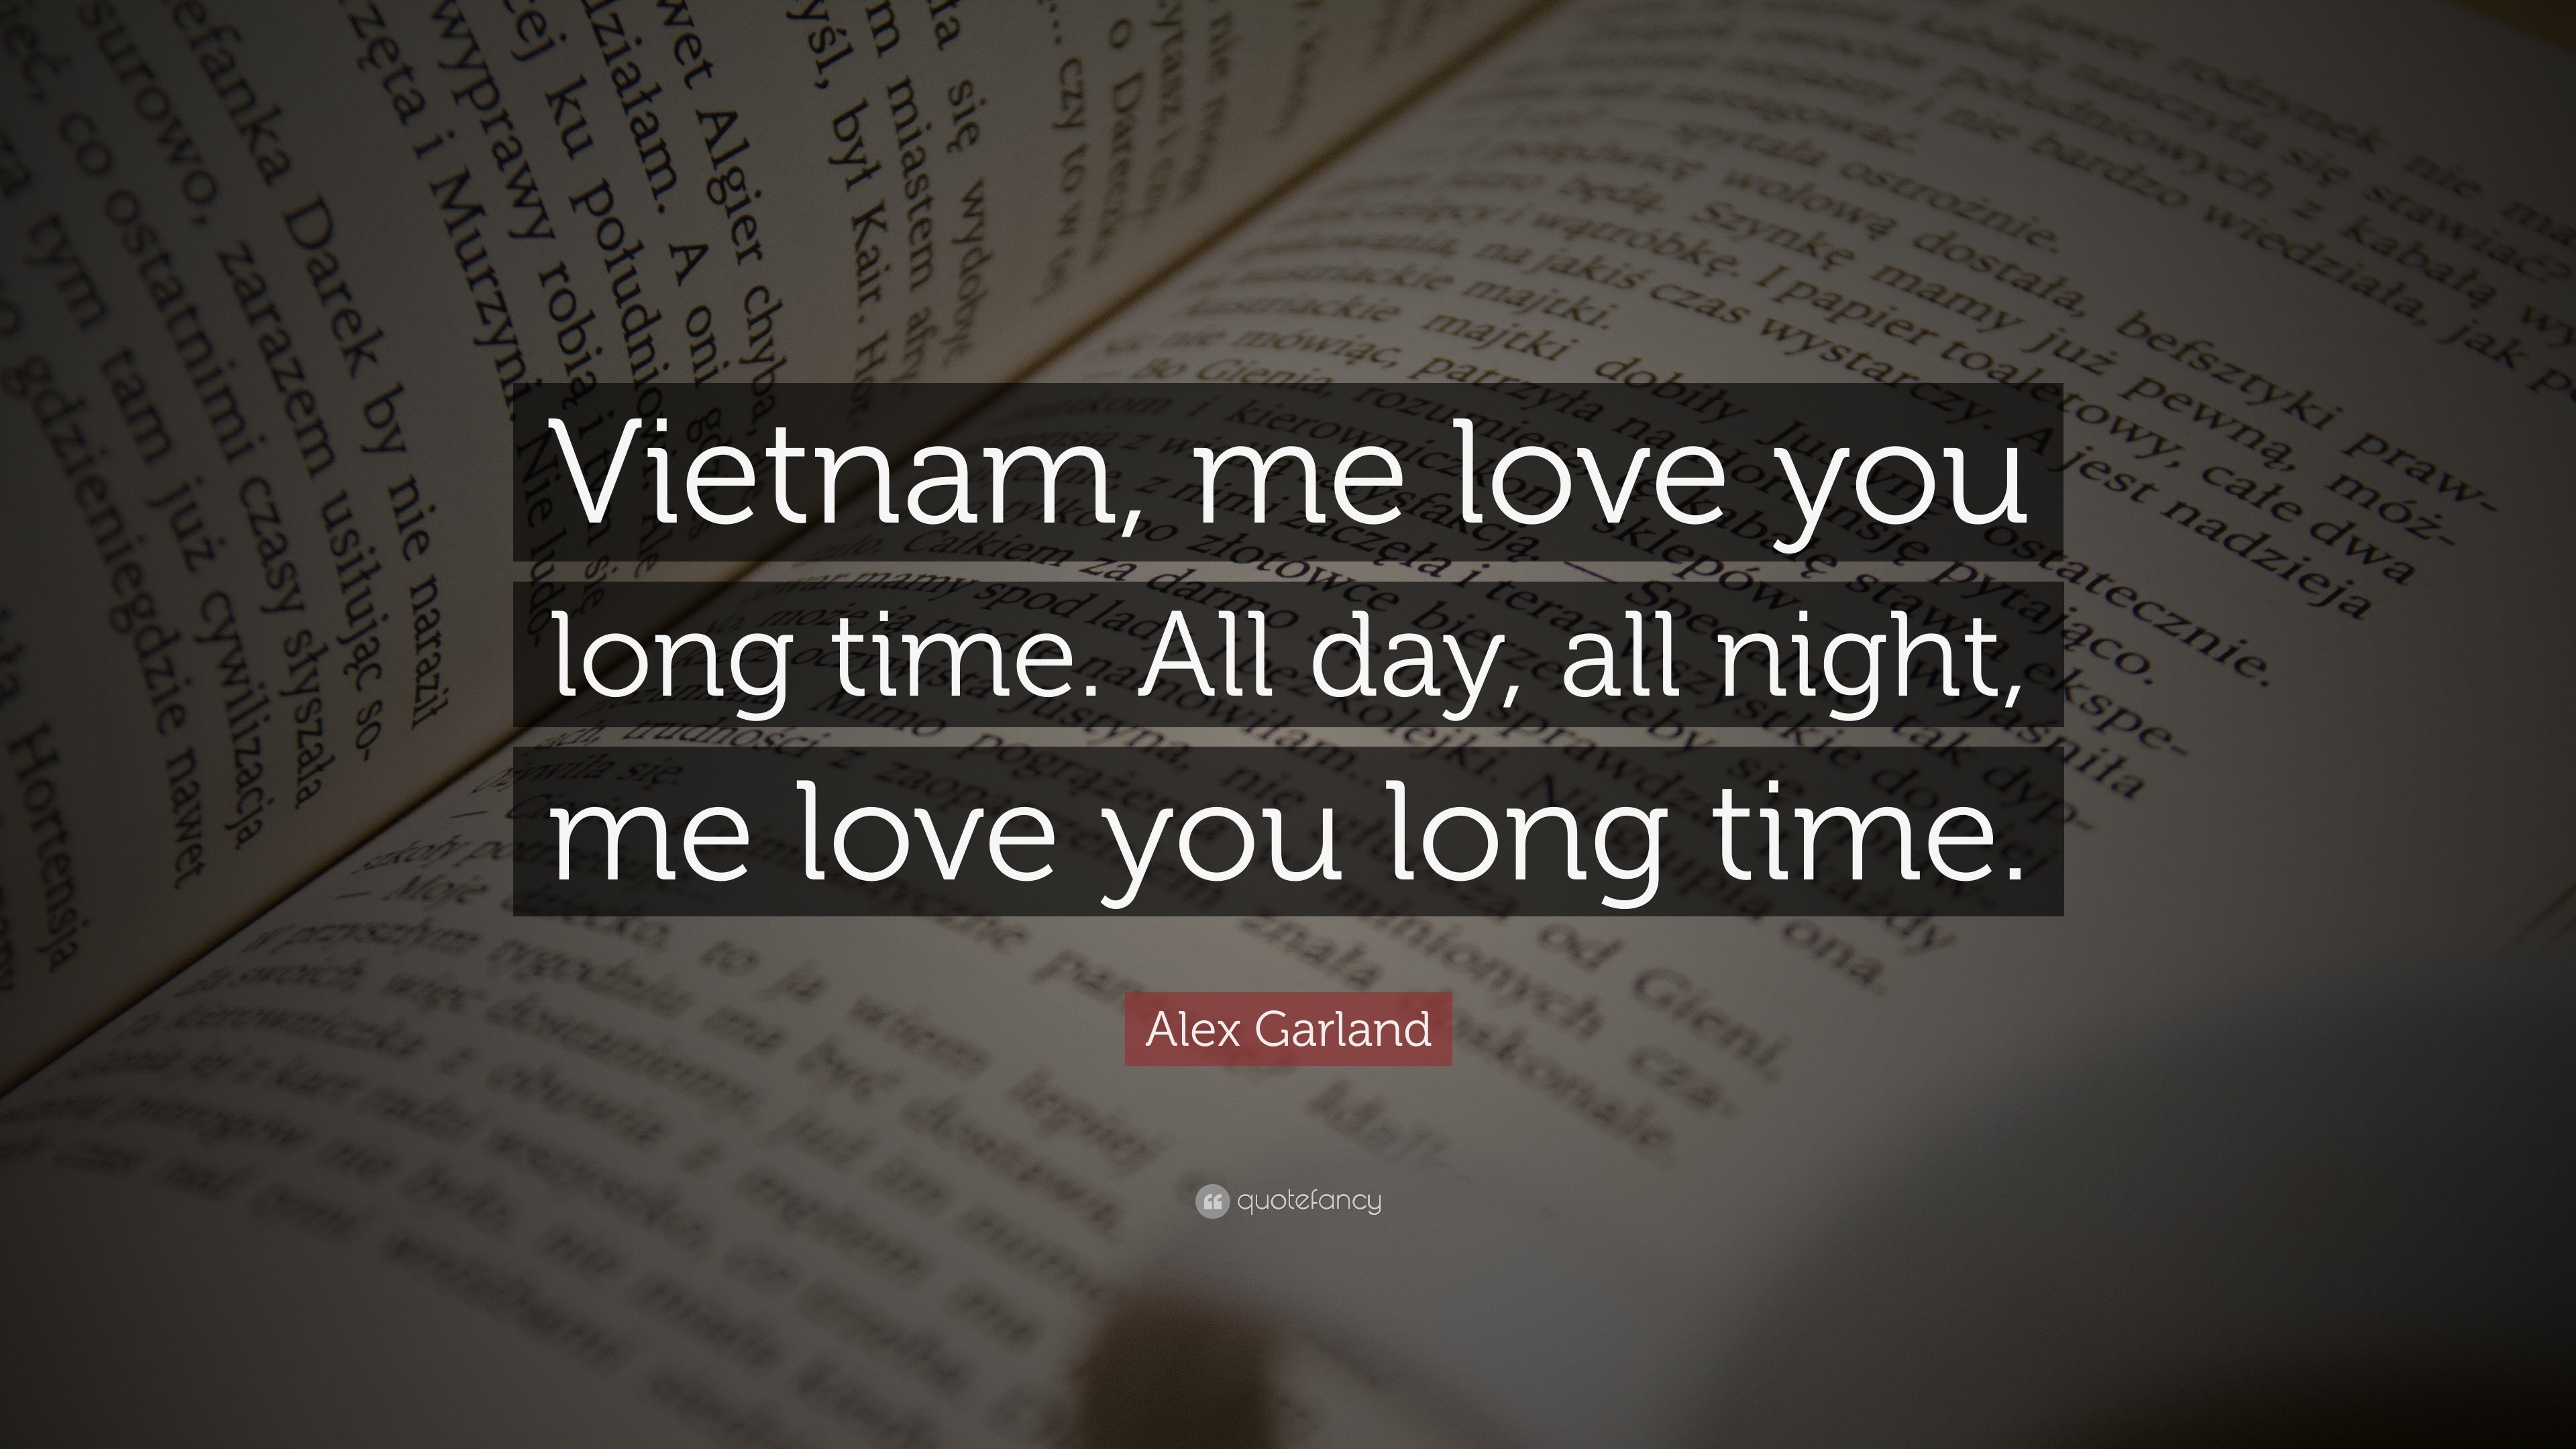 Alex Garland Quote “Vietnam me love you long time All day